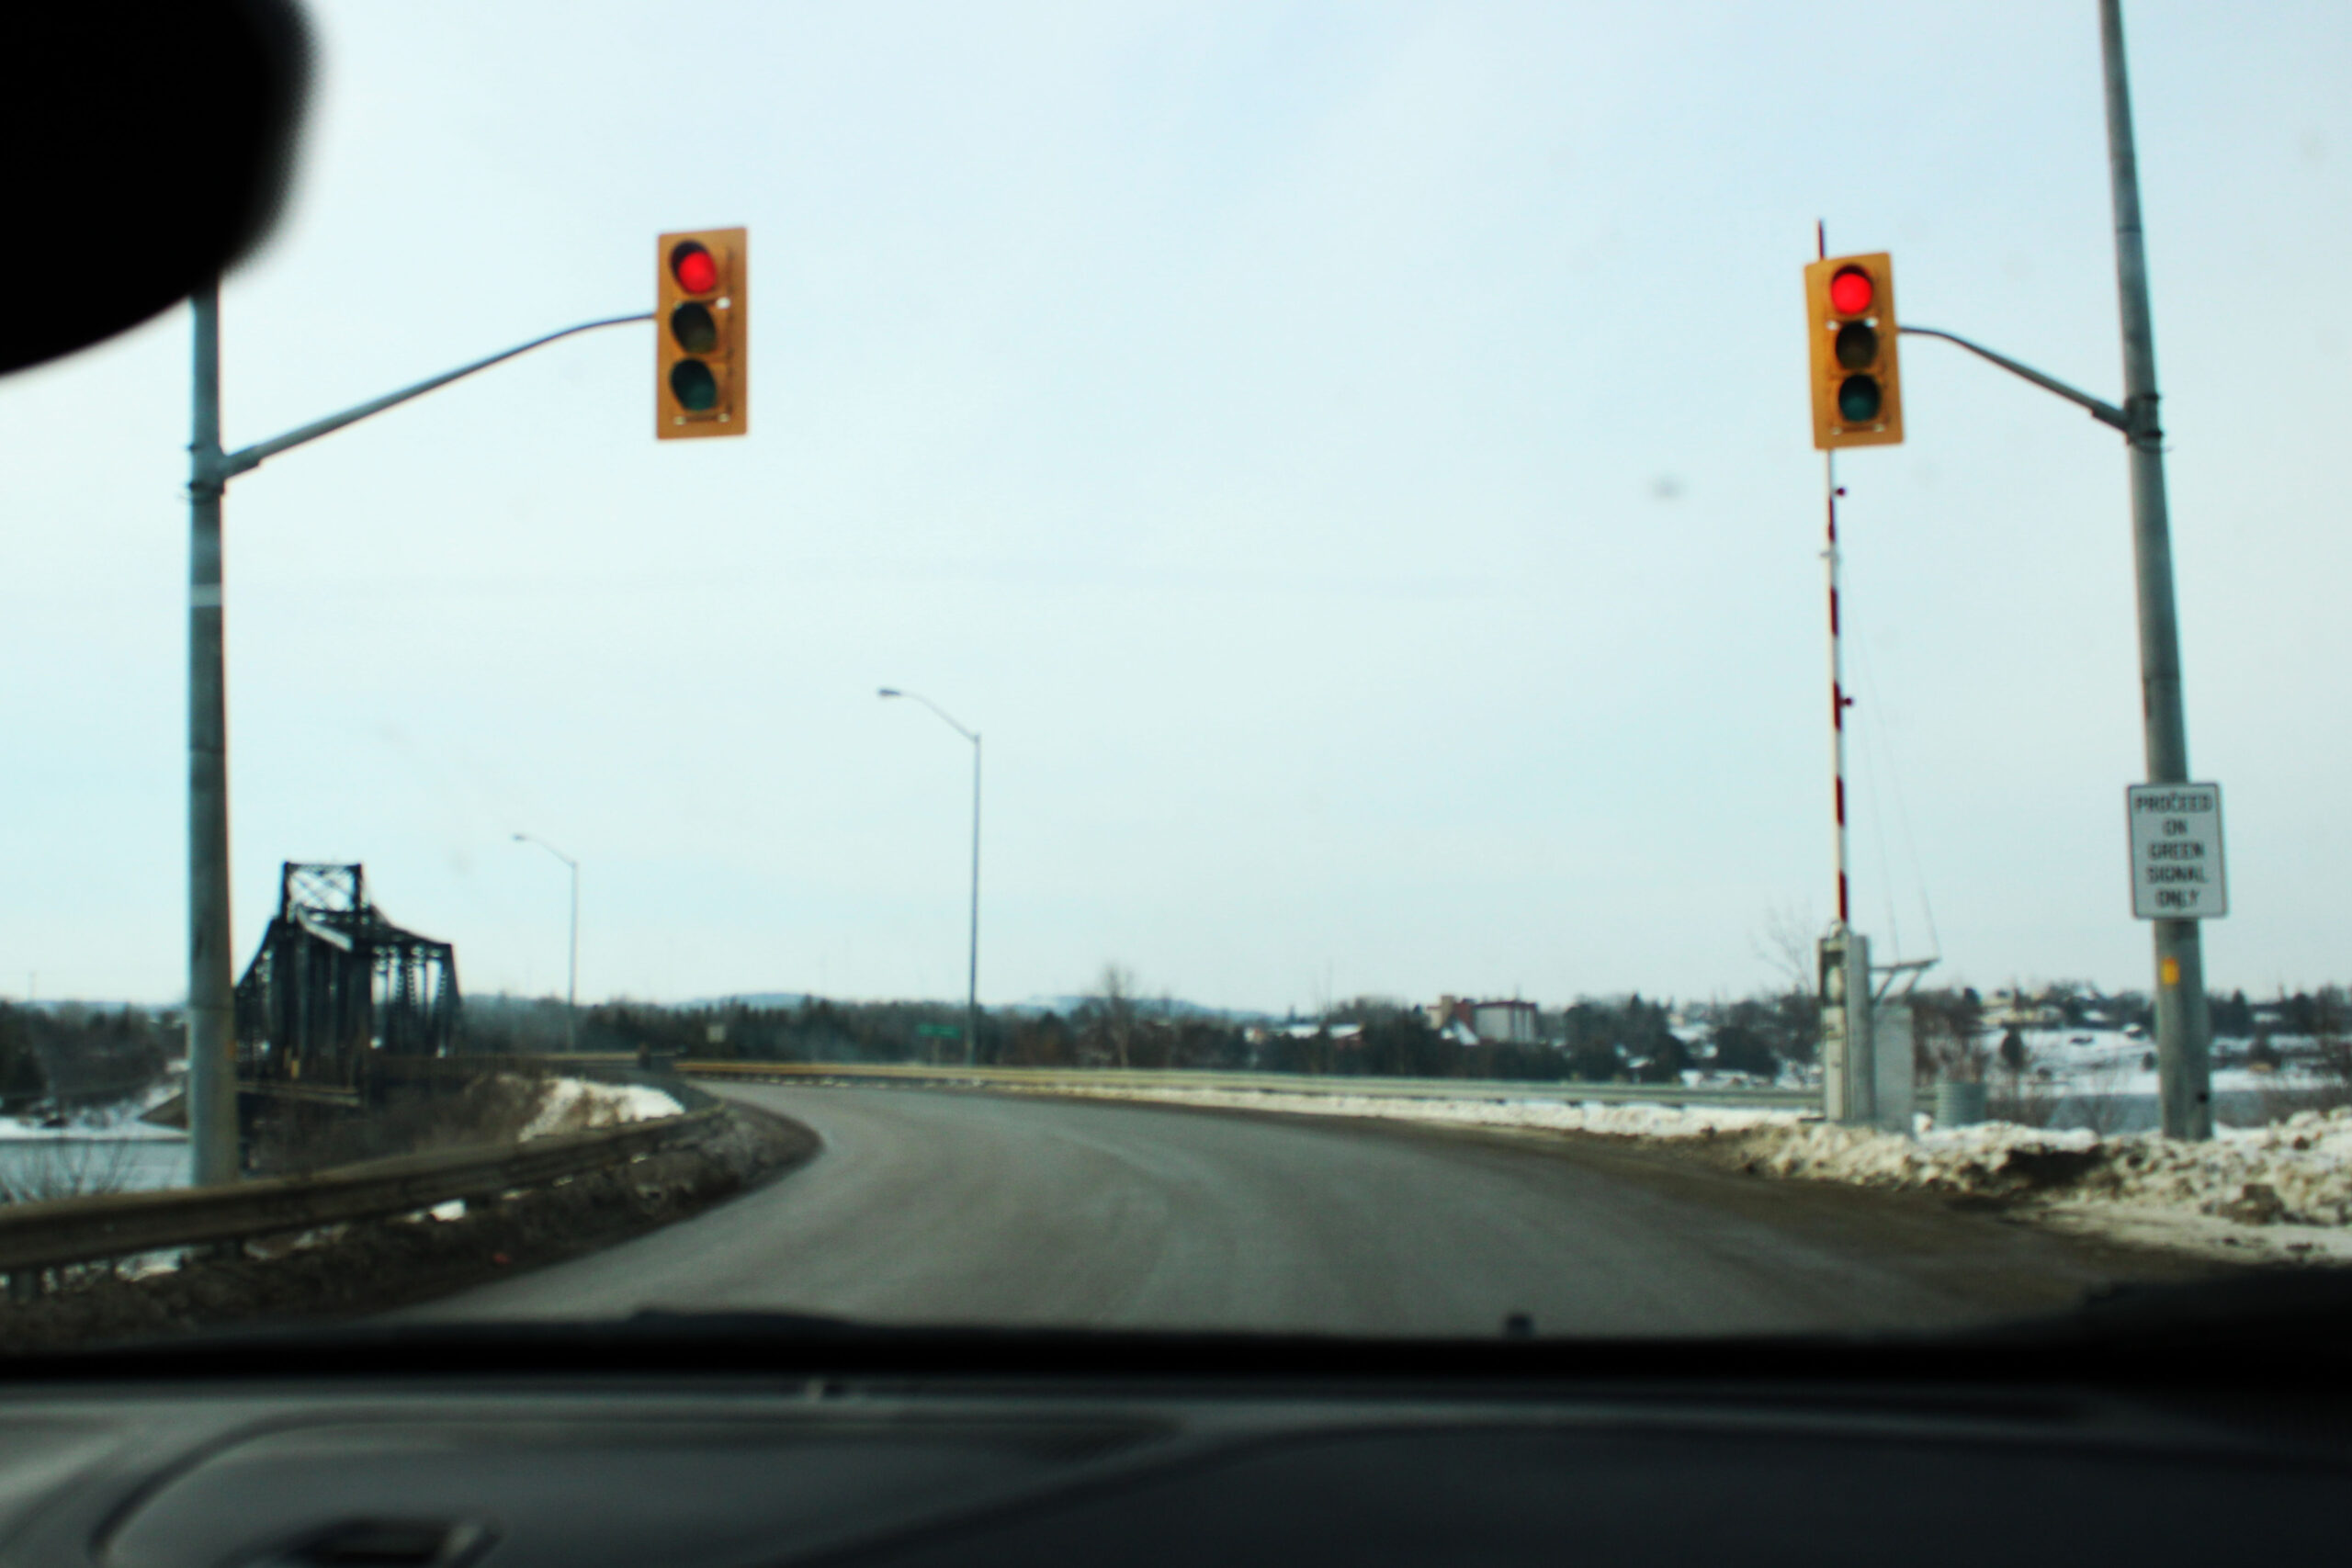 view from dashboard of car of two stop lights in the foreground and a metal bridge in the background